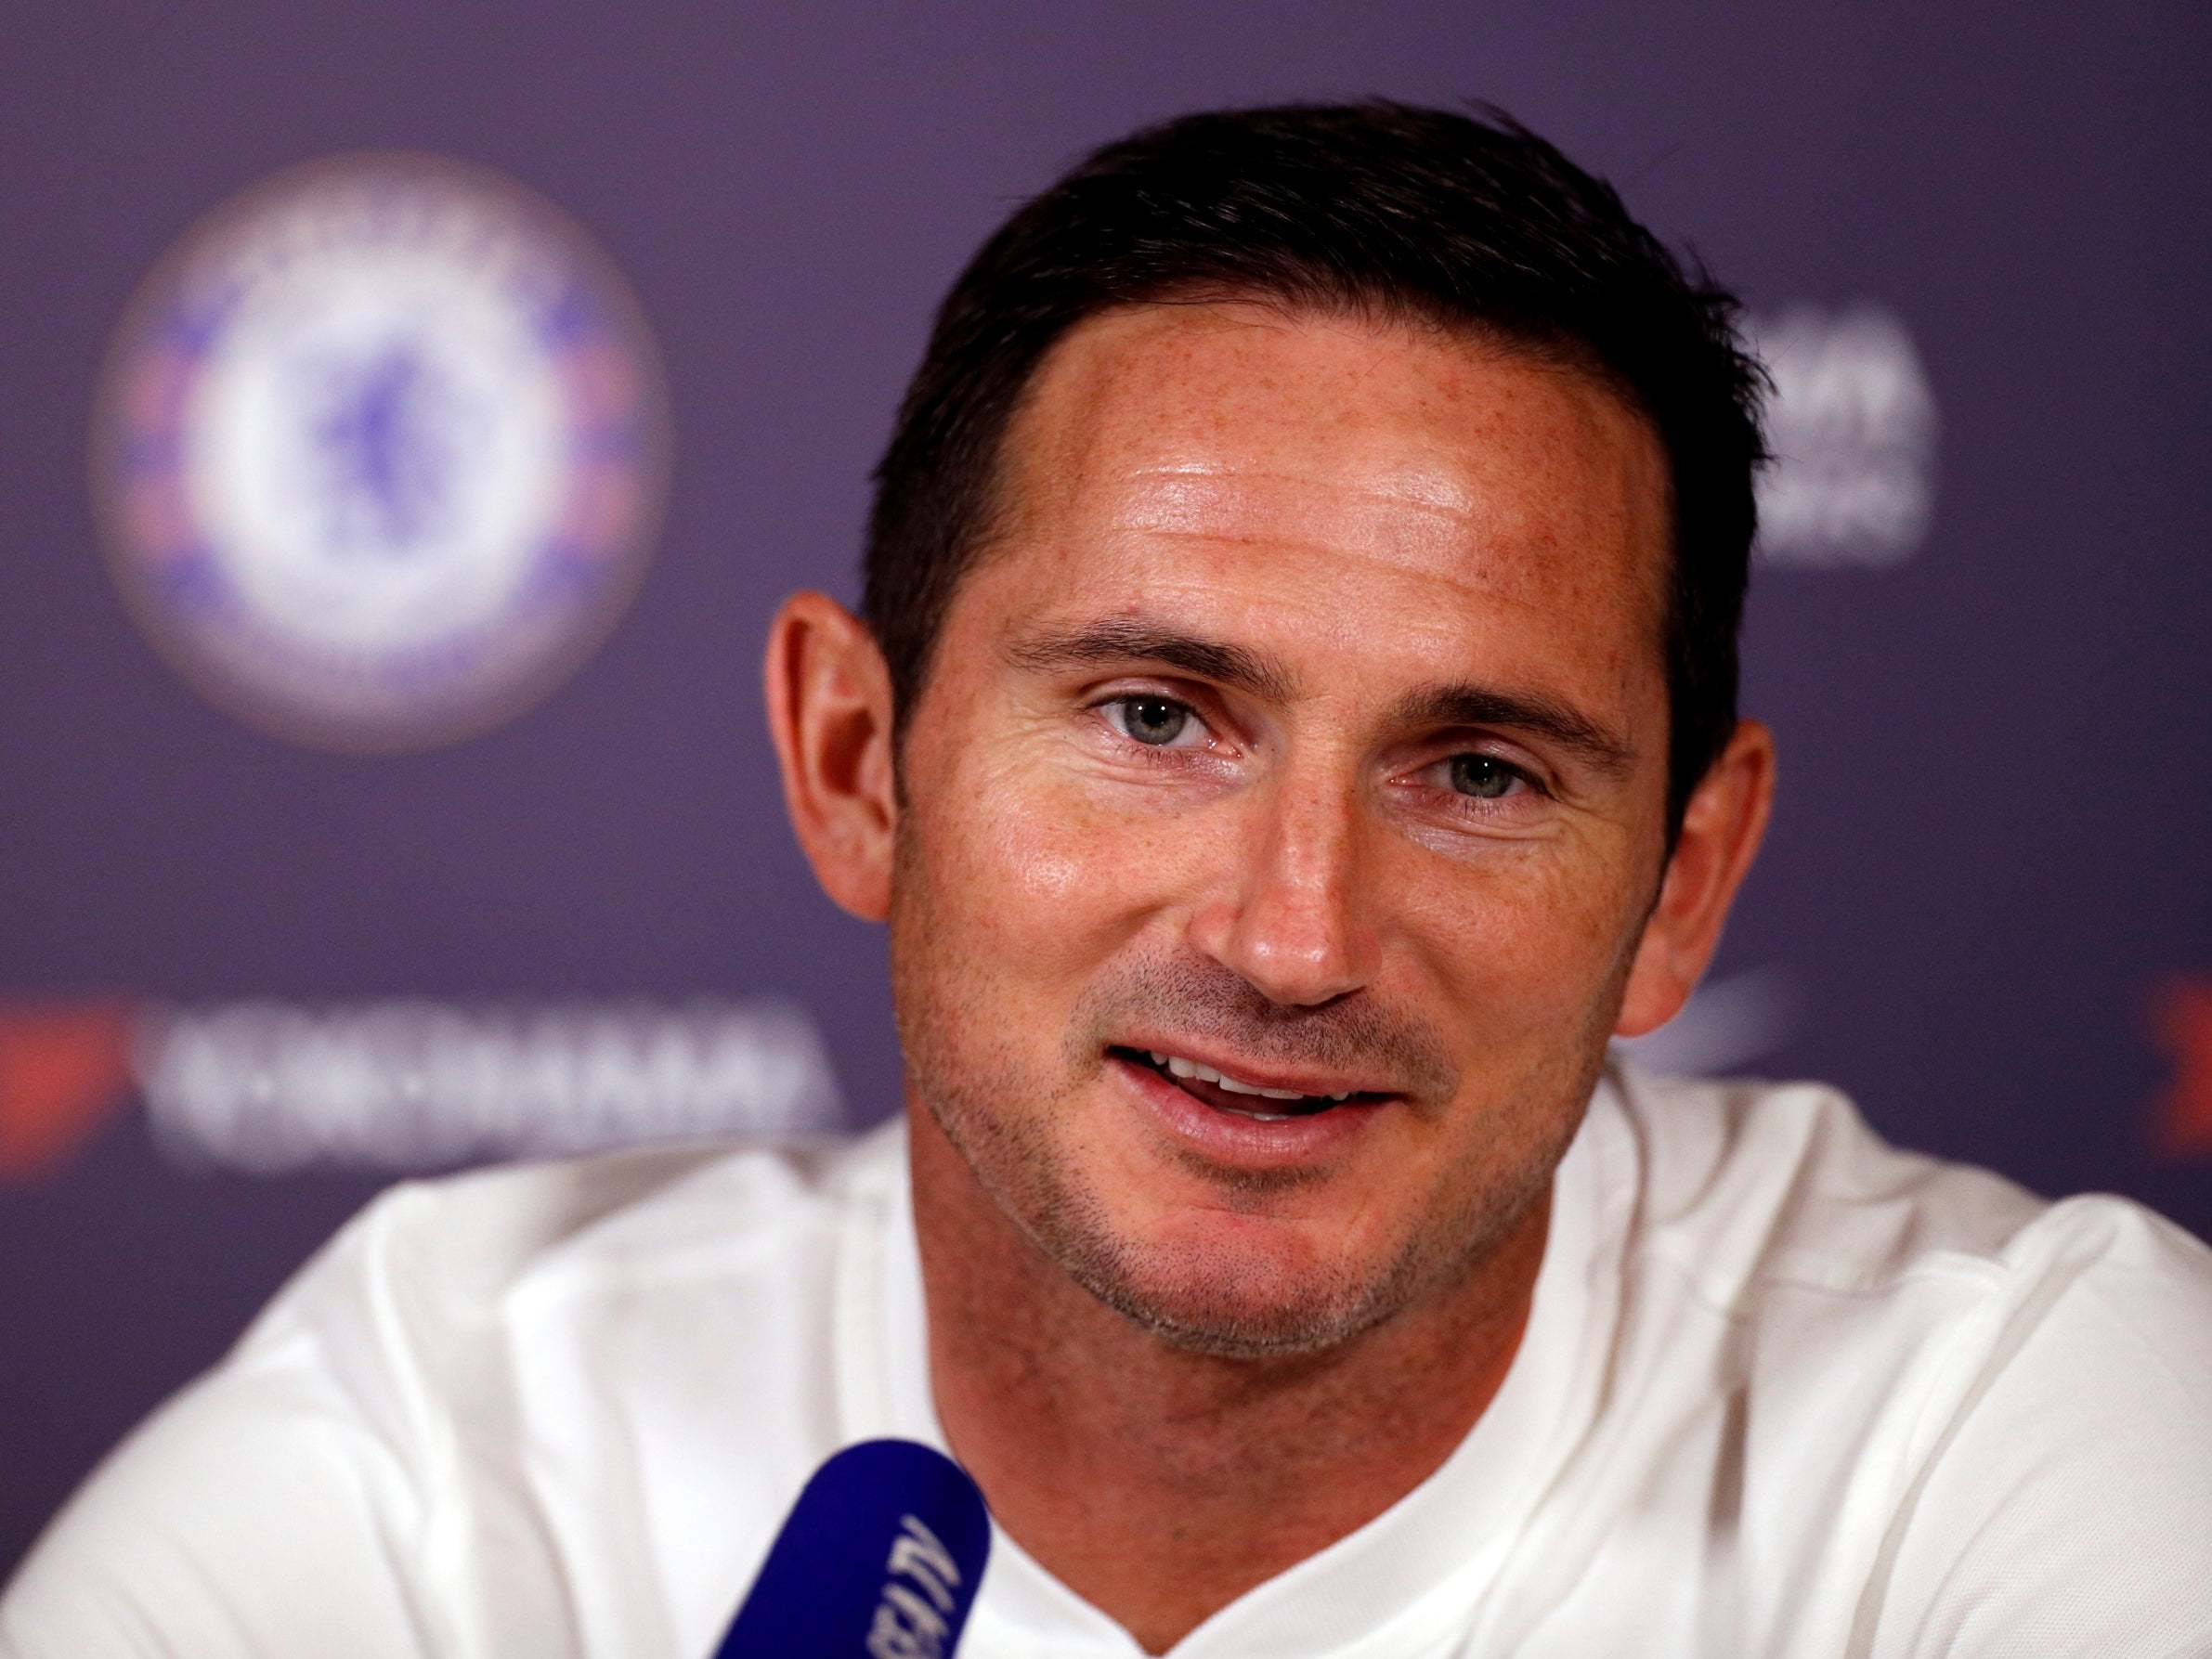 Chelsea manager Frank Lampard told his players not to talk about transfer ban